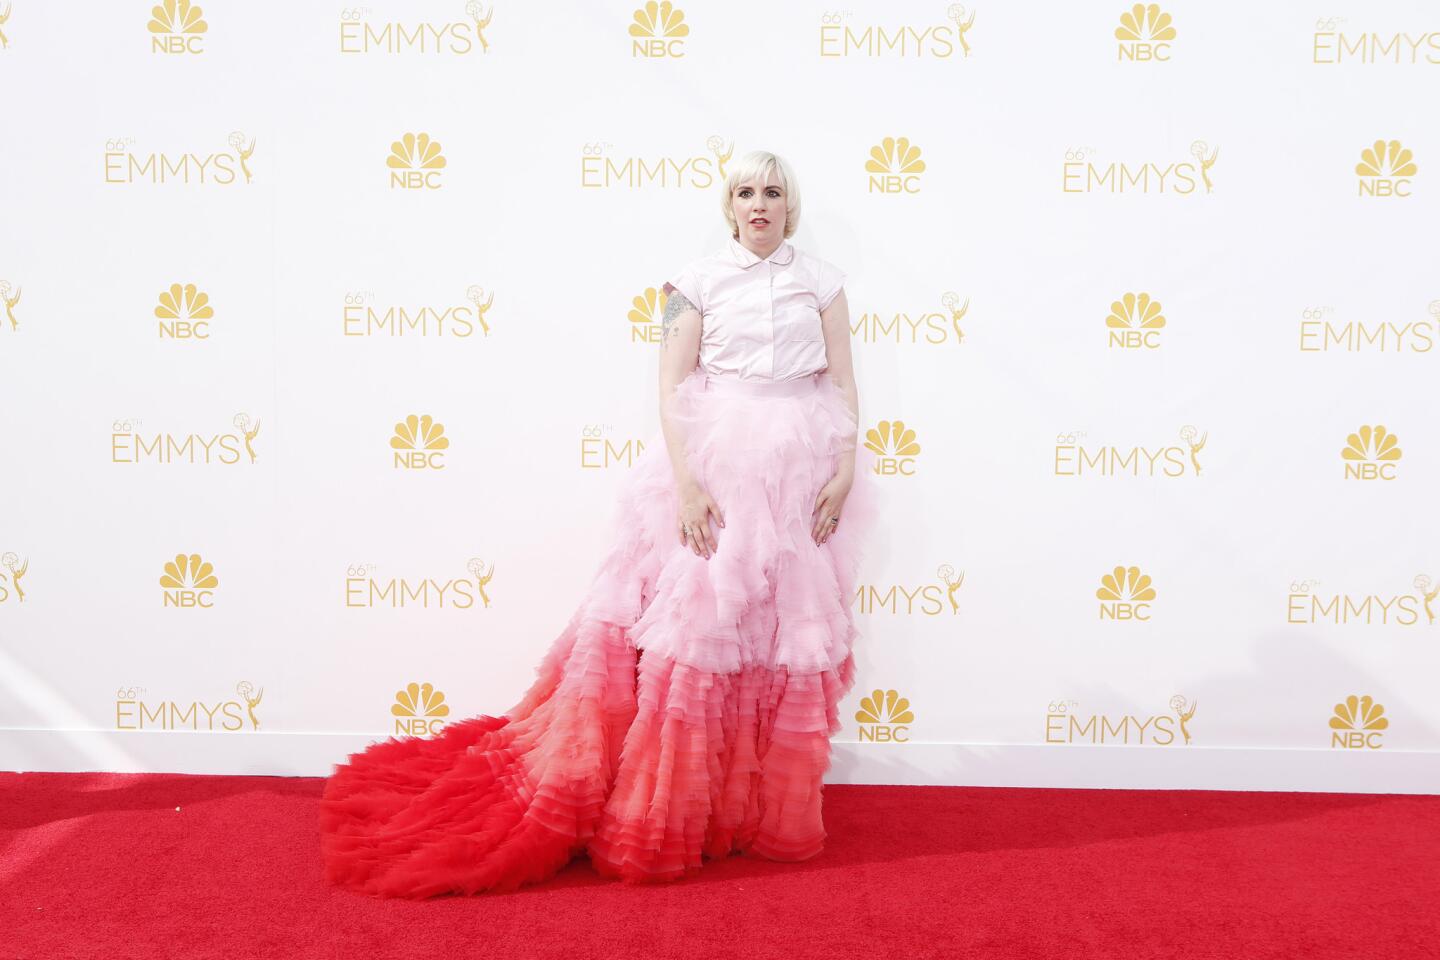 Lena Dunham continued to be the queen of awkward dressing